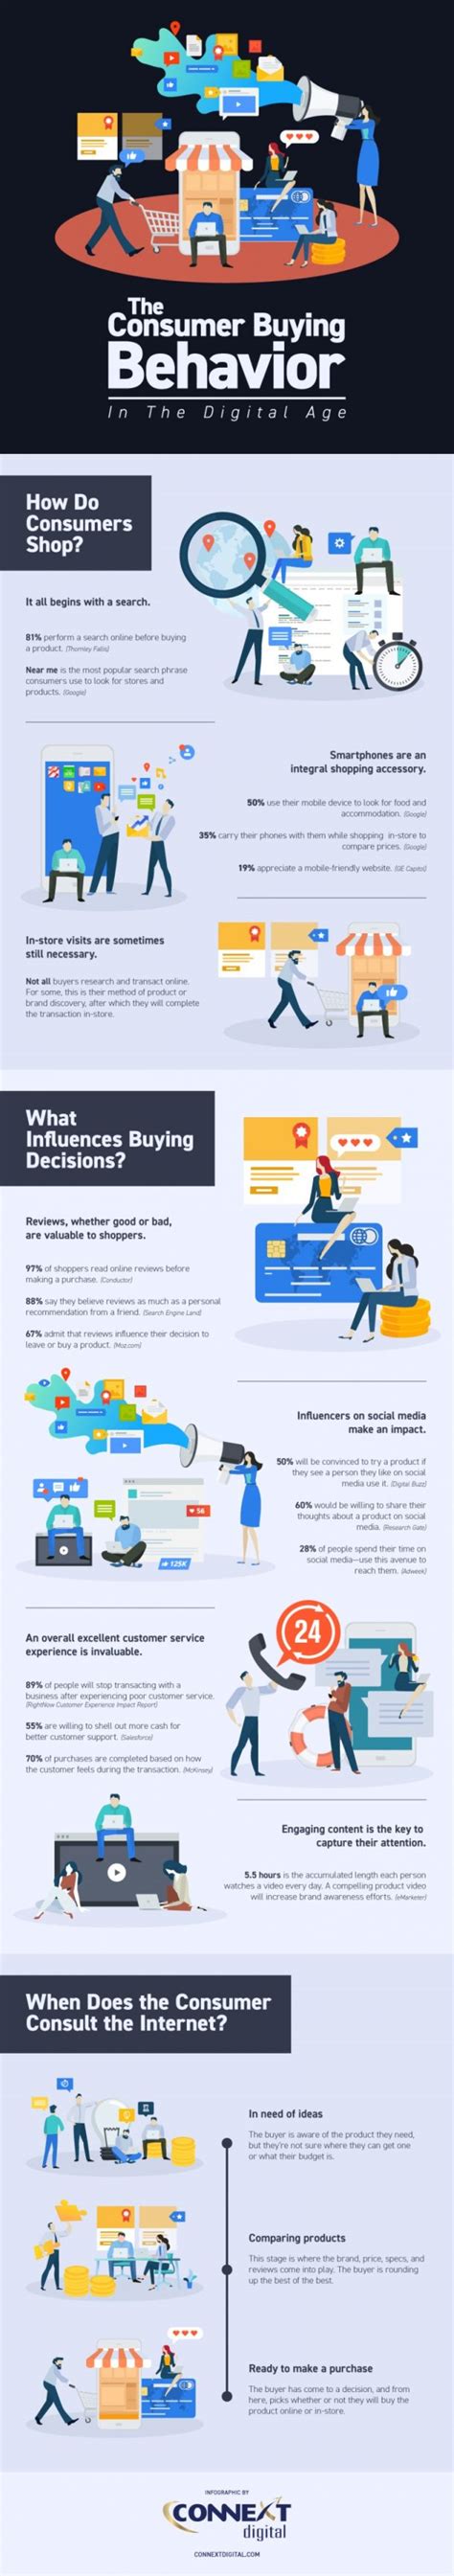 The Consumer Buying Behavior In The Digital Age Infographic Skillz Me